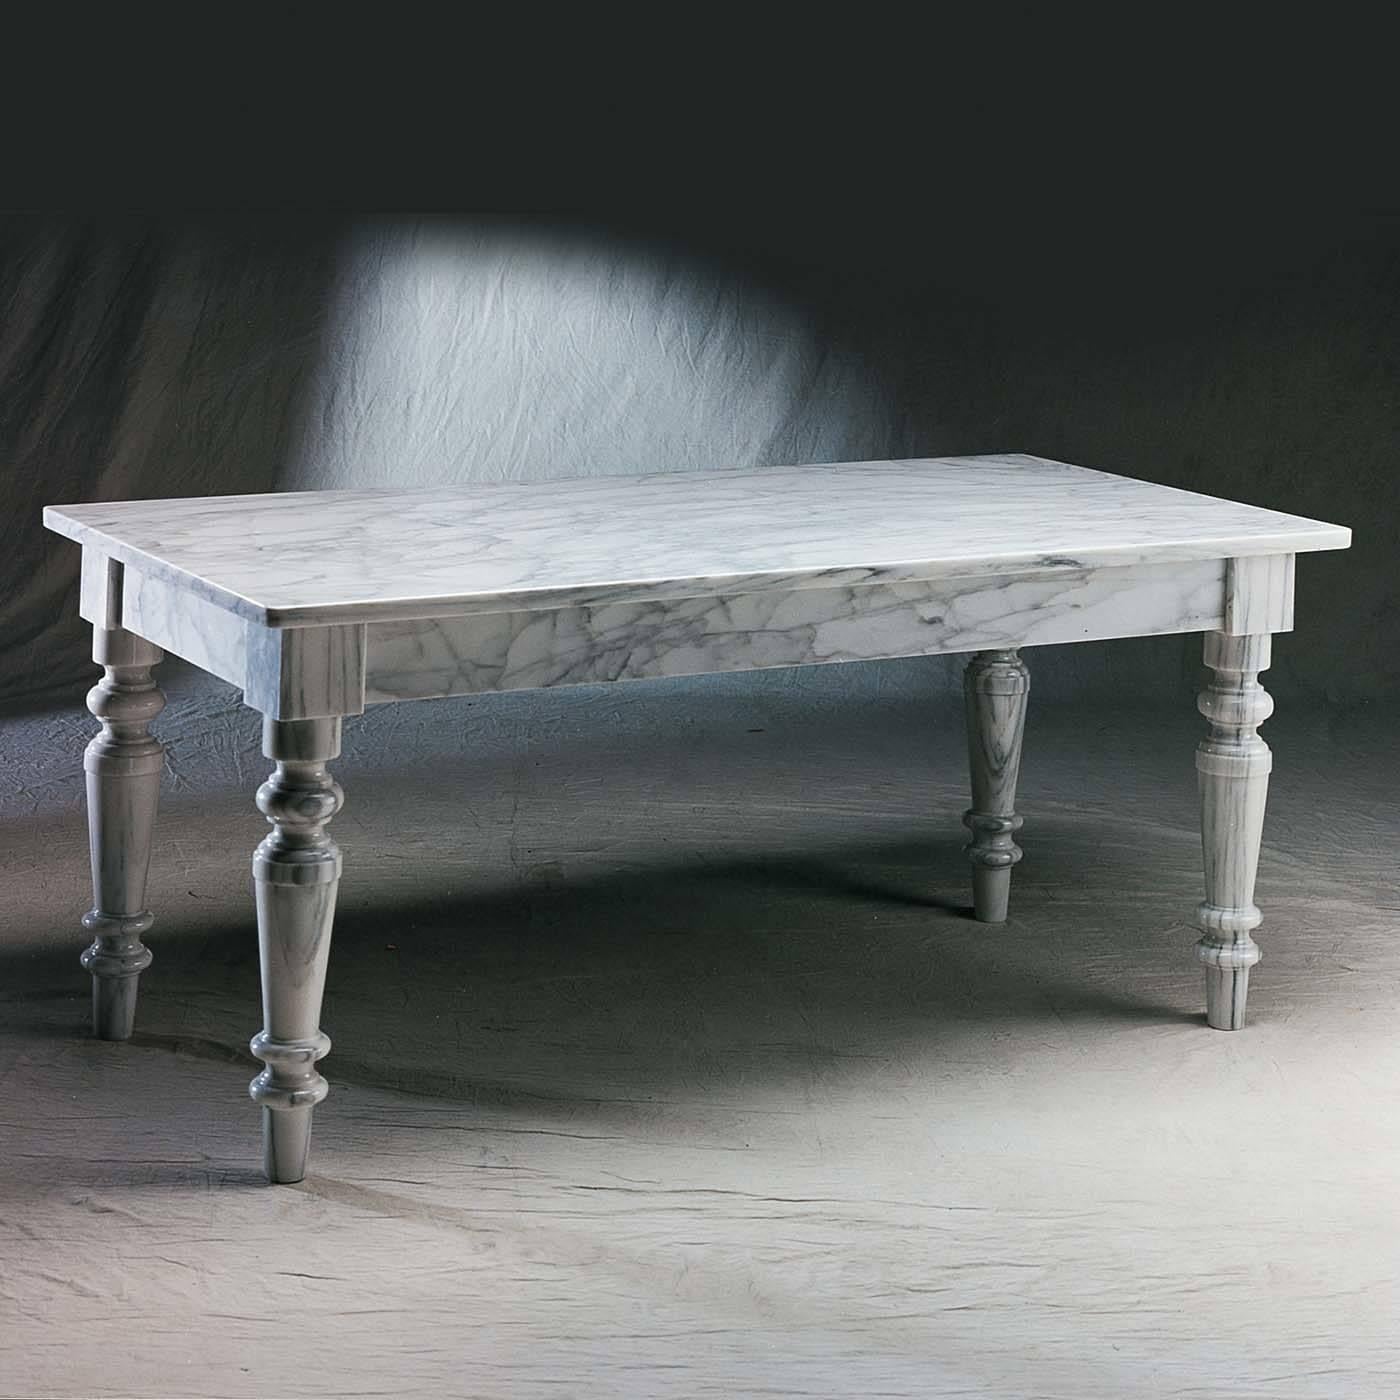 Inspired by the 19th century antique partners desk, this monochromatic single-material marble table is reinterpreted as a dining table offering ample room with a long top and tapering, fluted legs that add expansiveness to this luxurious piece. In